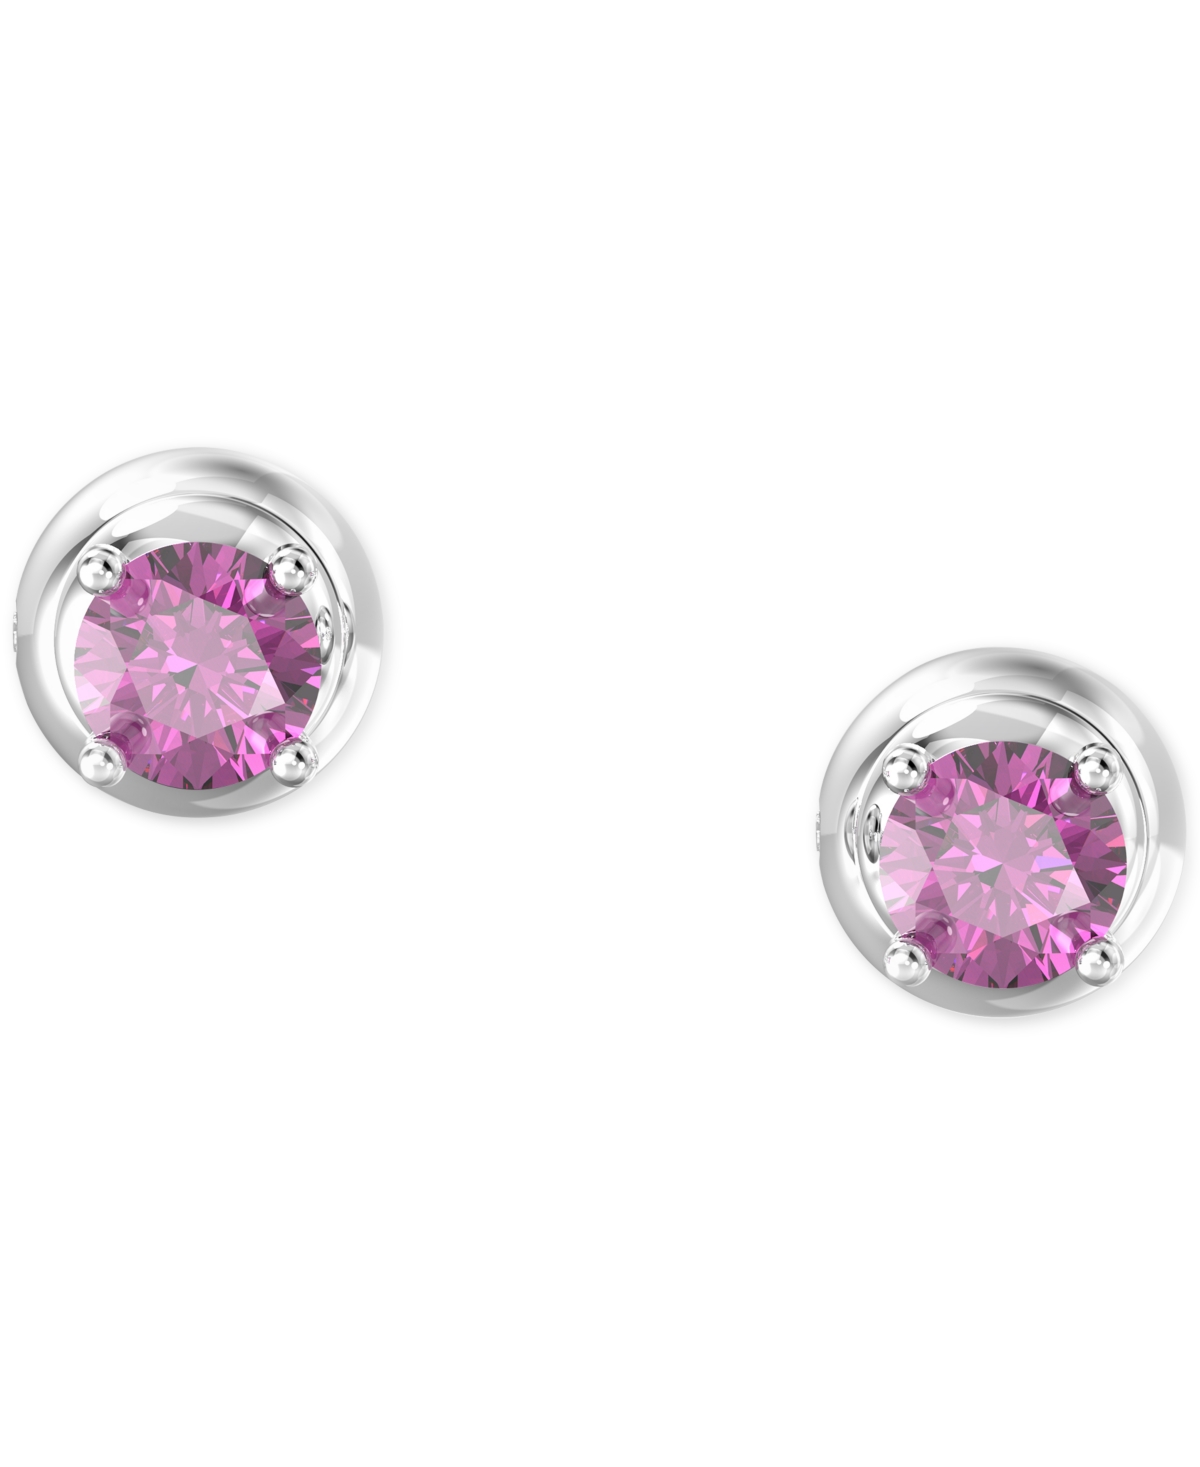 Shop Swarovski Faceted Color Crystal Small Stud Earrings In Purple